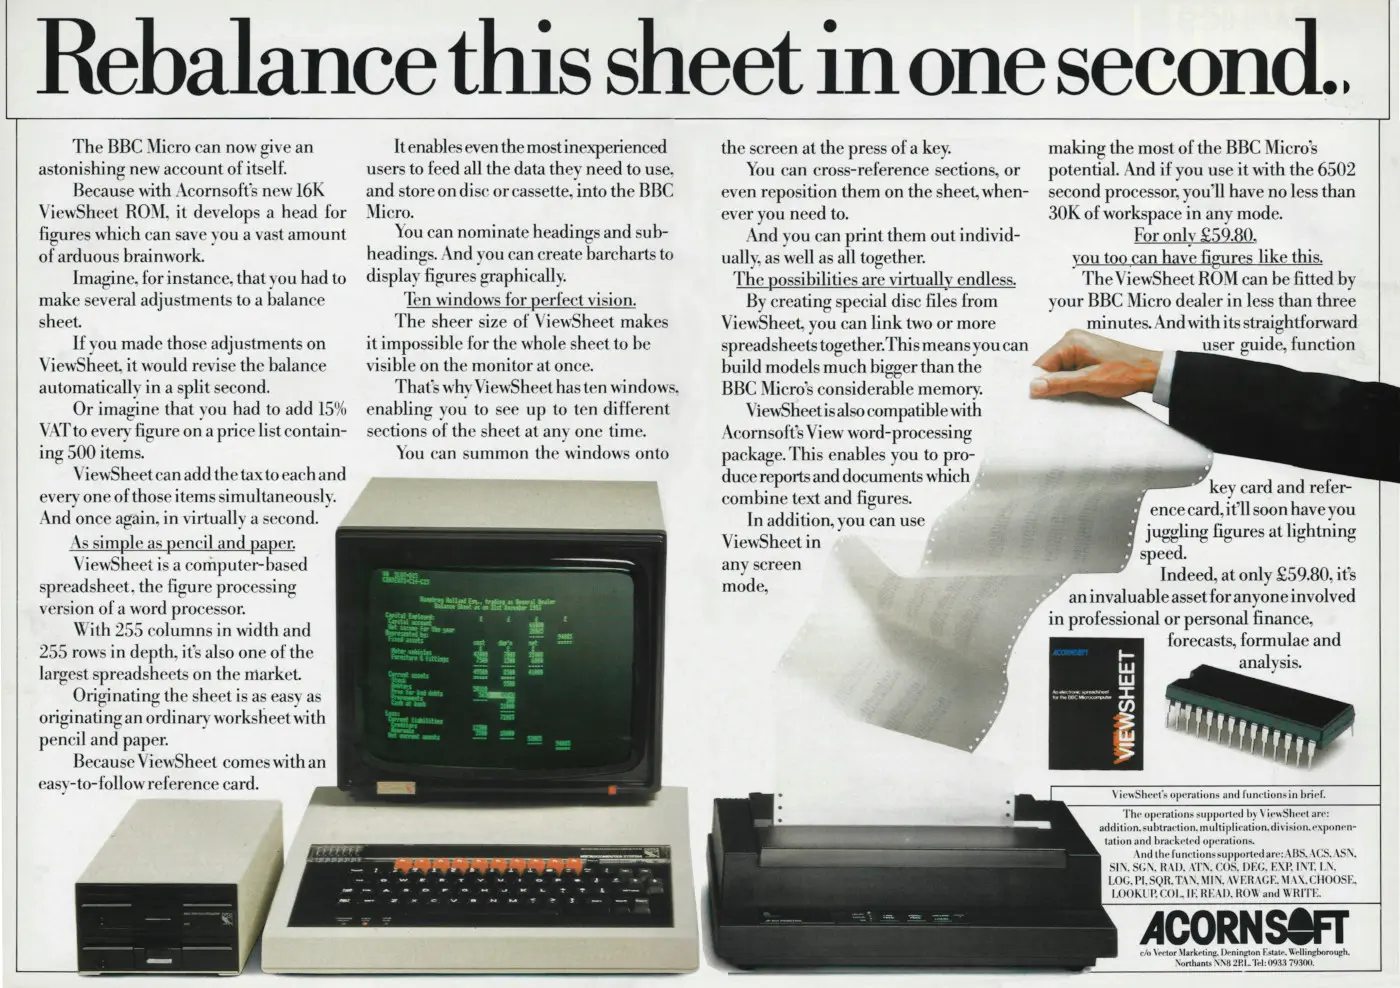 Acorn Advert: Re-balance This Sheet in One Second, from The Micro User, September 1984